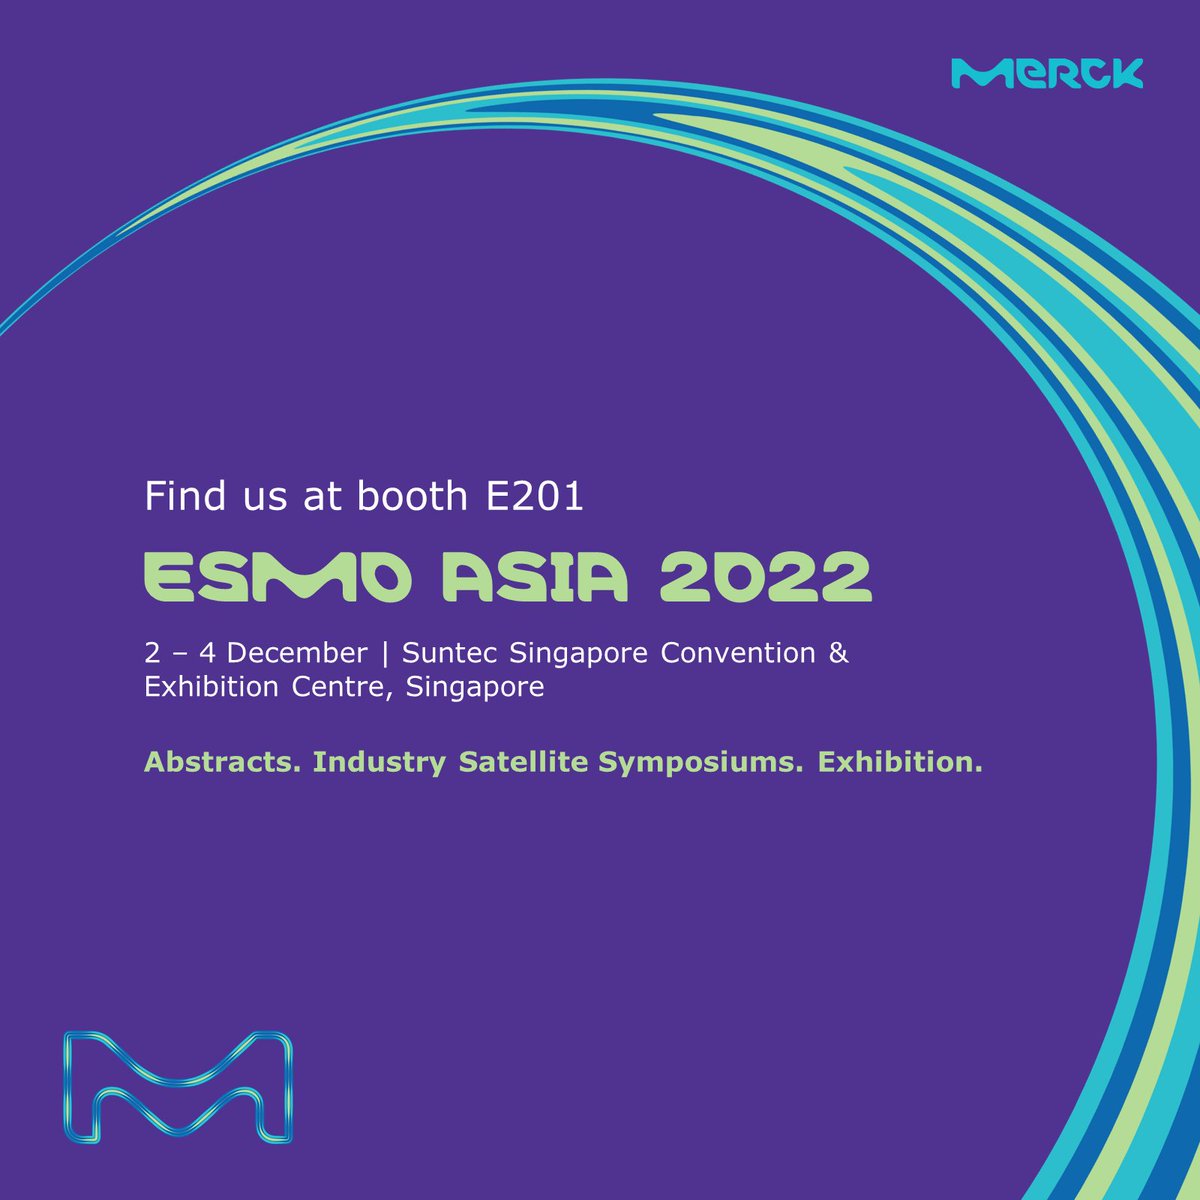 Join the #ESMOAsia22 sessions today, where we'll be sharing the latest research and breakthrough innovations that have the potential to improve health outcomes for patients living with #cancer: ms.spr.ly/6015dNo4B 

You can also find us at booth E201.

#HCPsOnly @myESMO